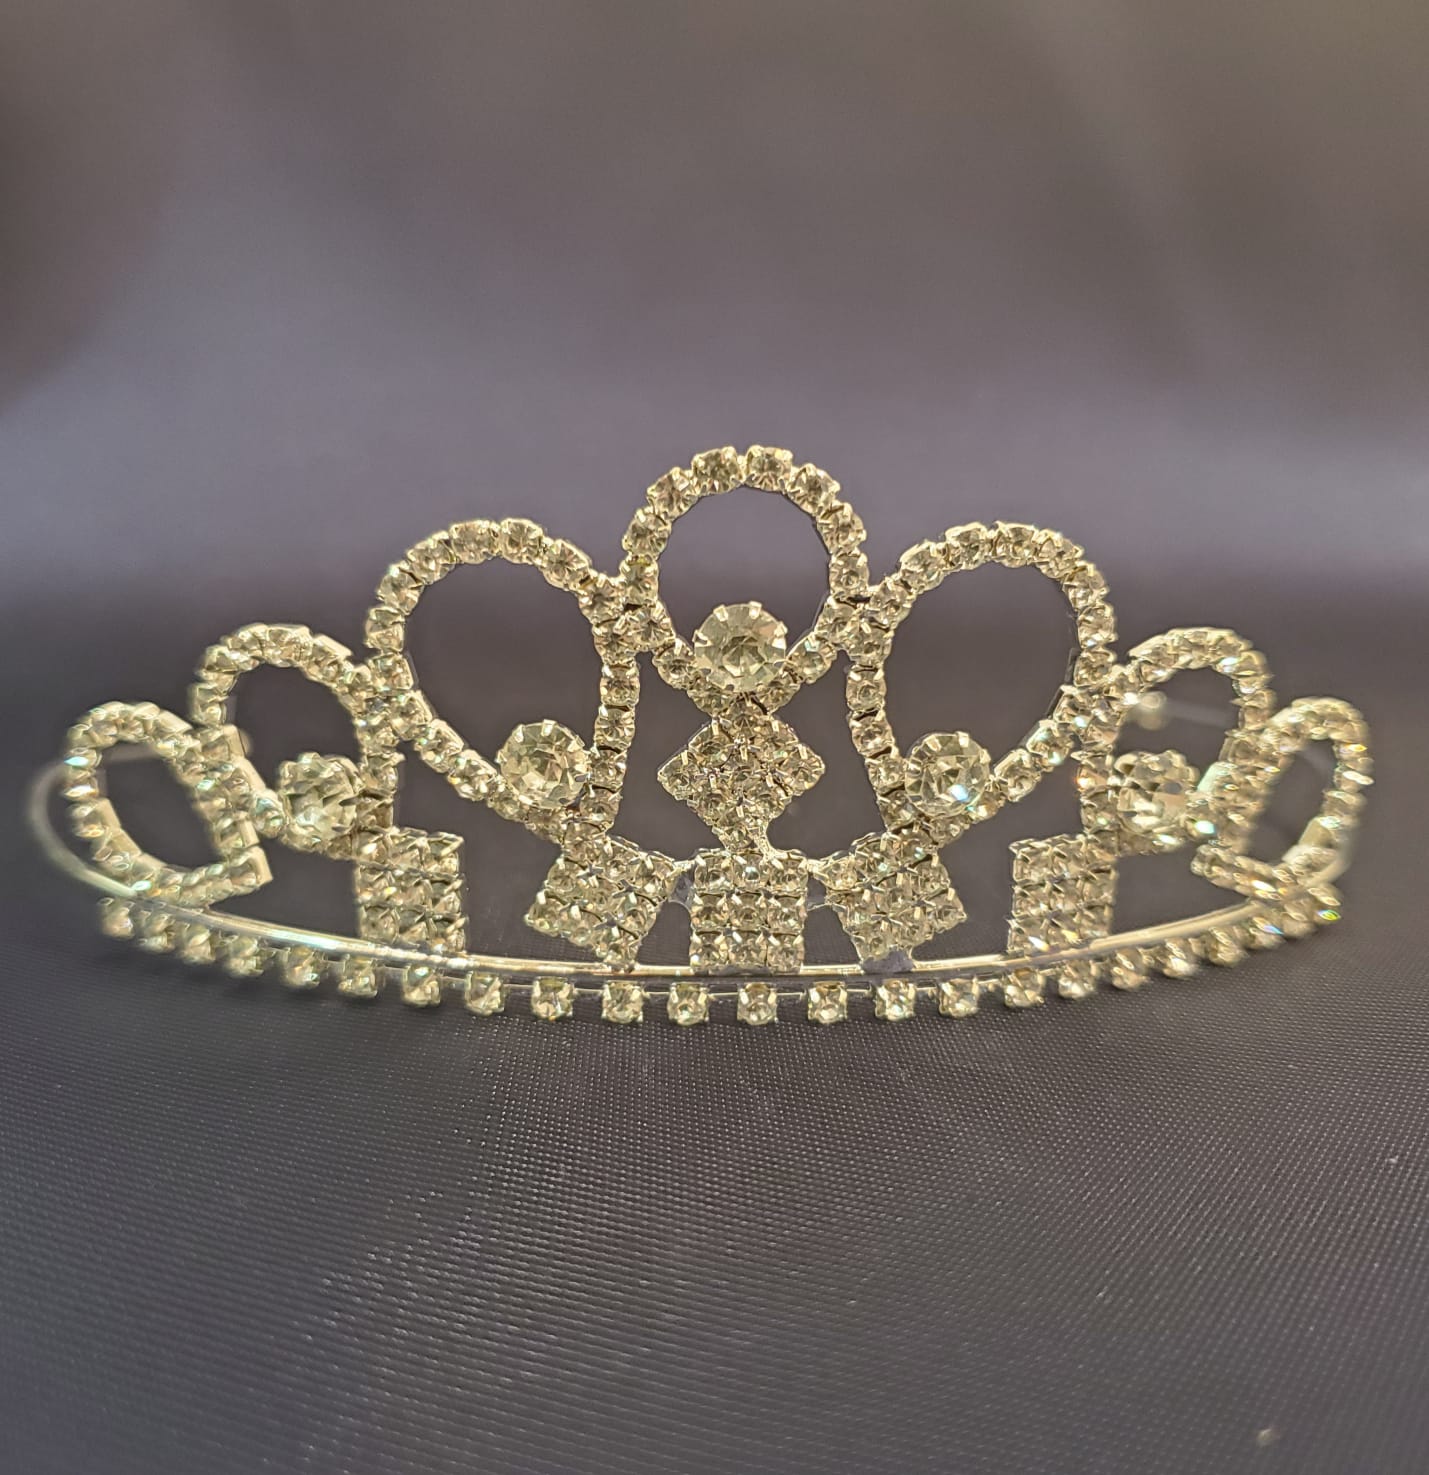 The Infinity Crown